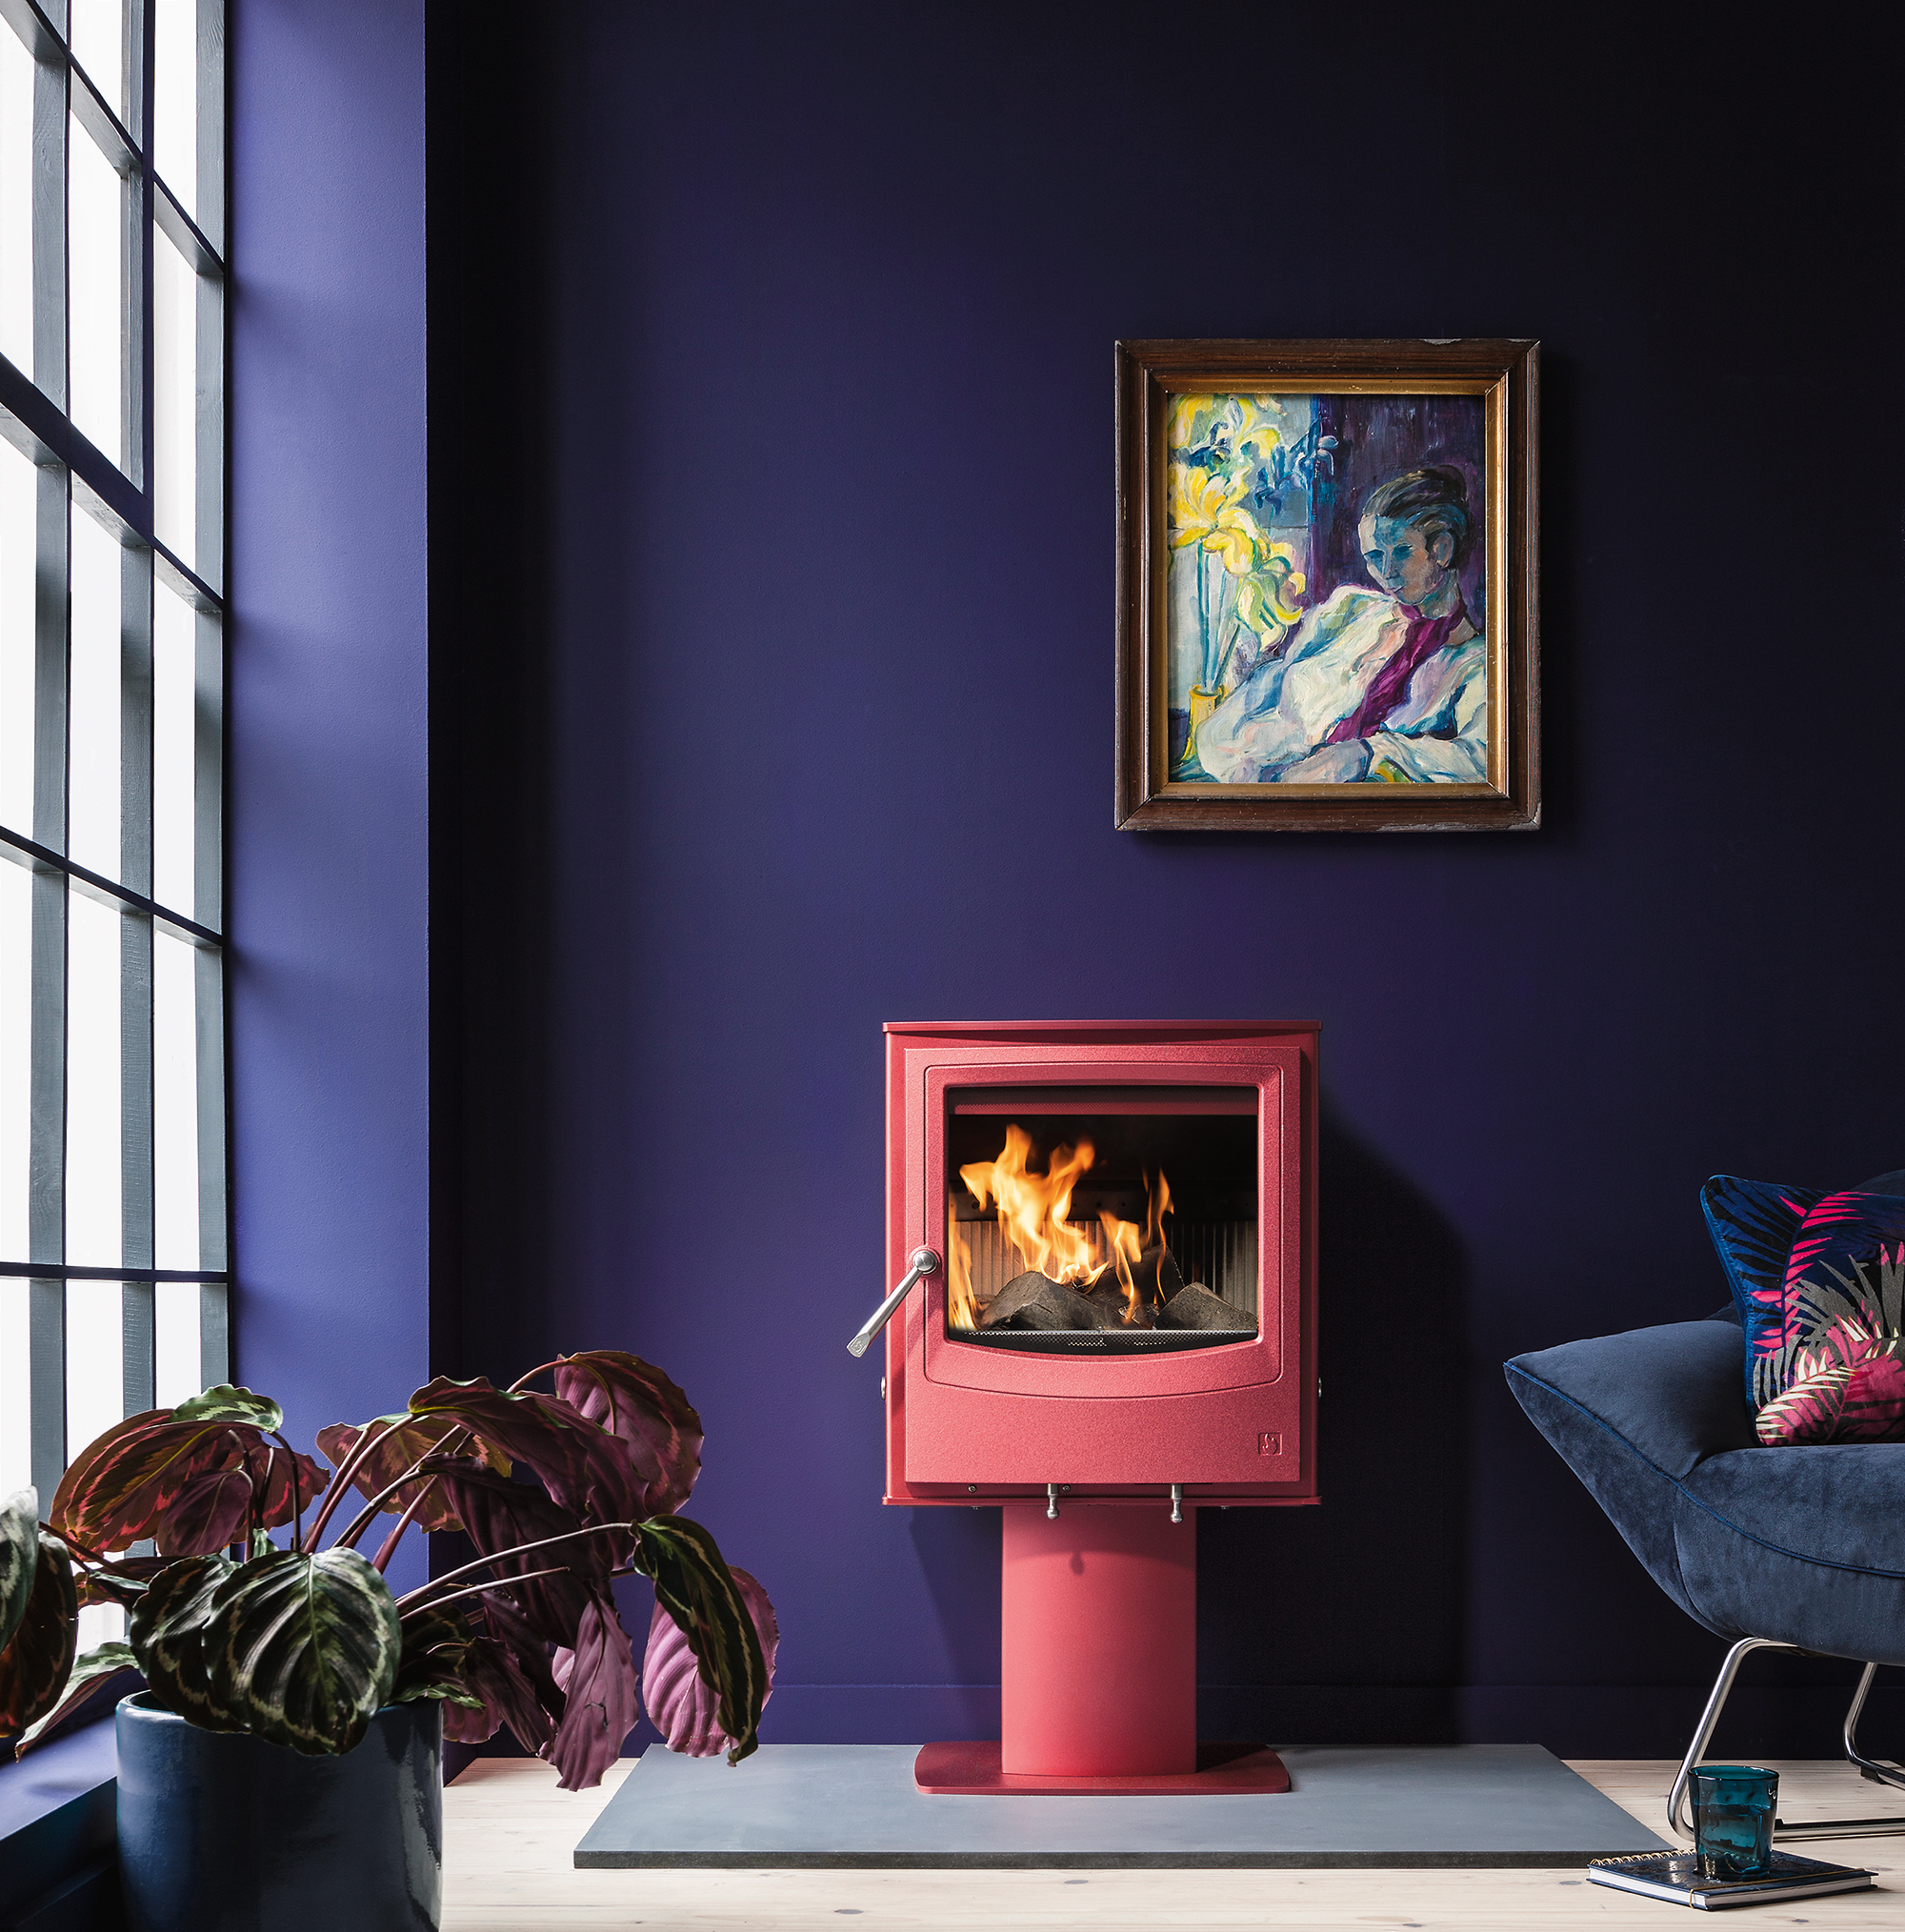 Red stove in purple room